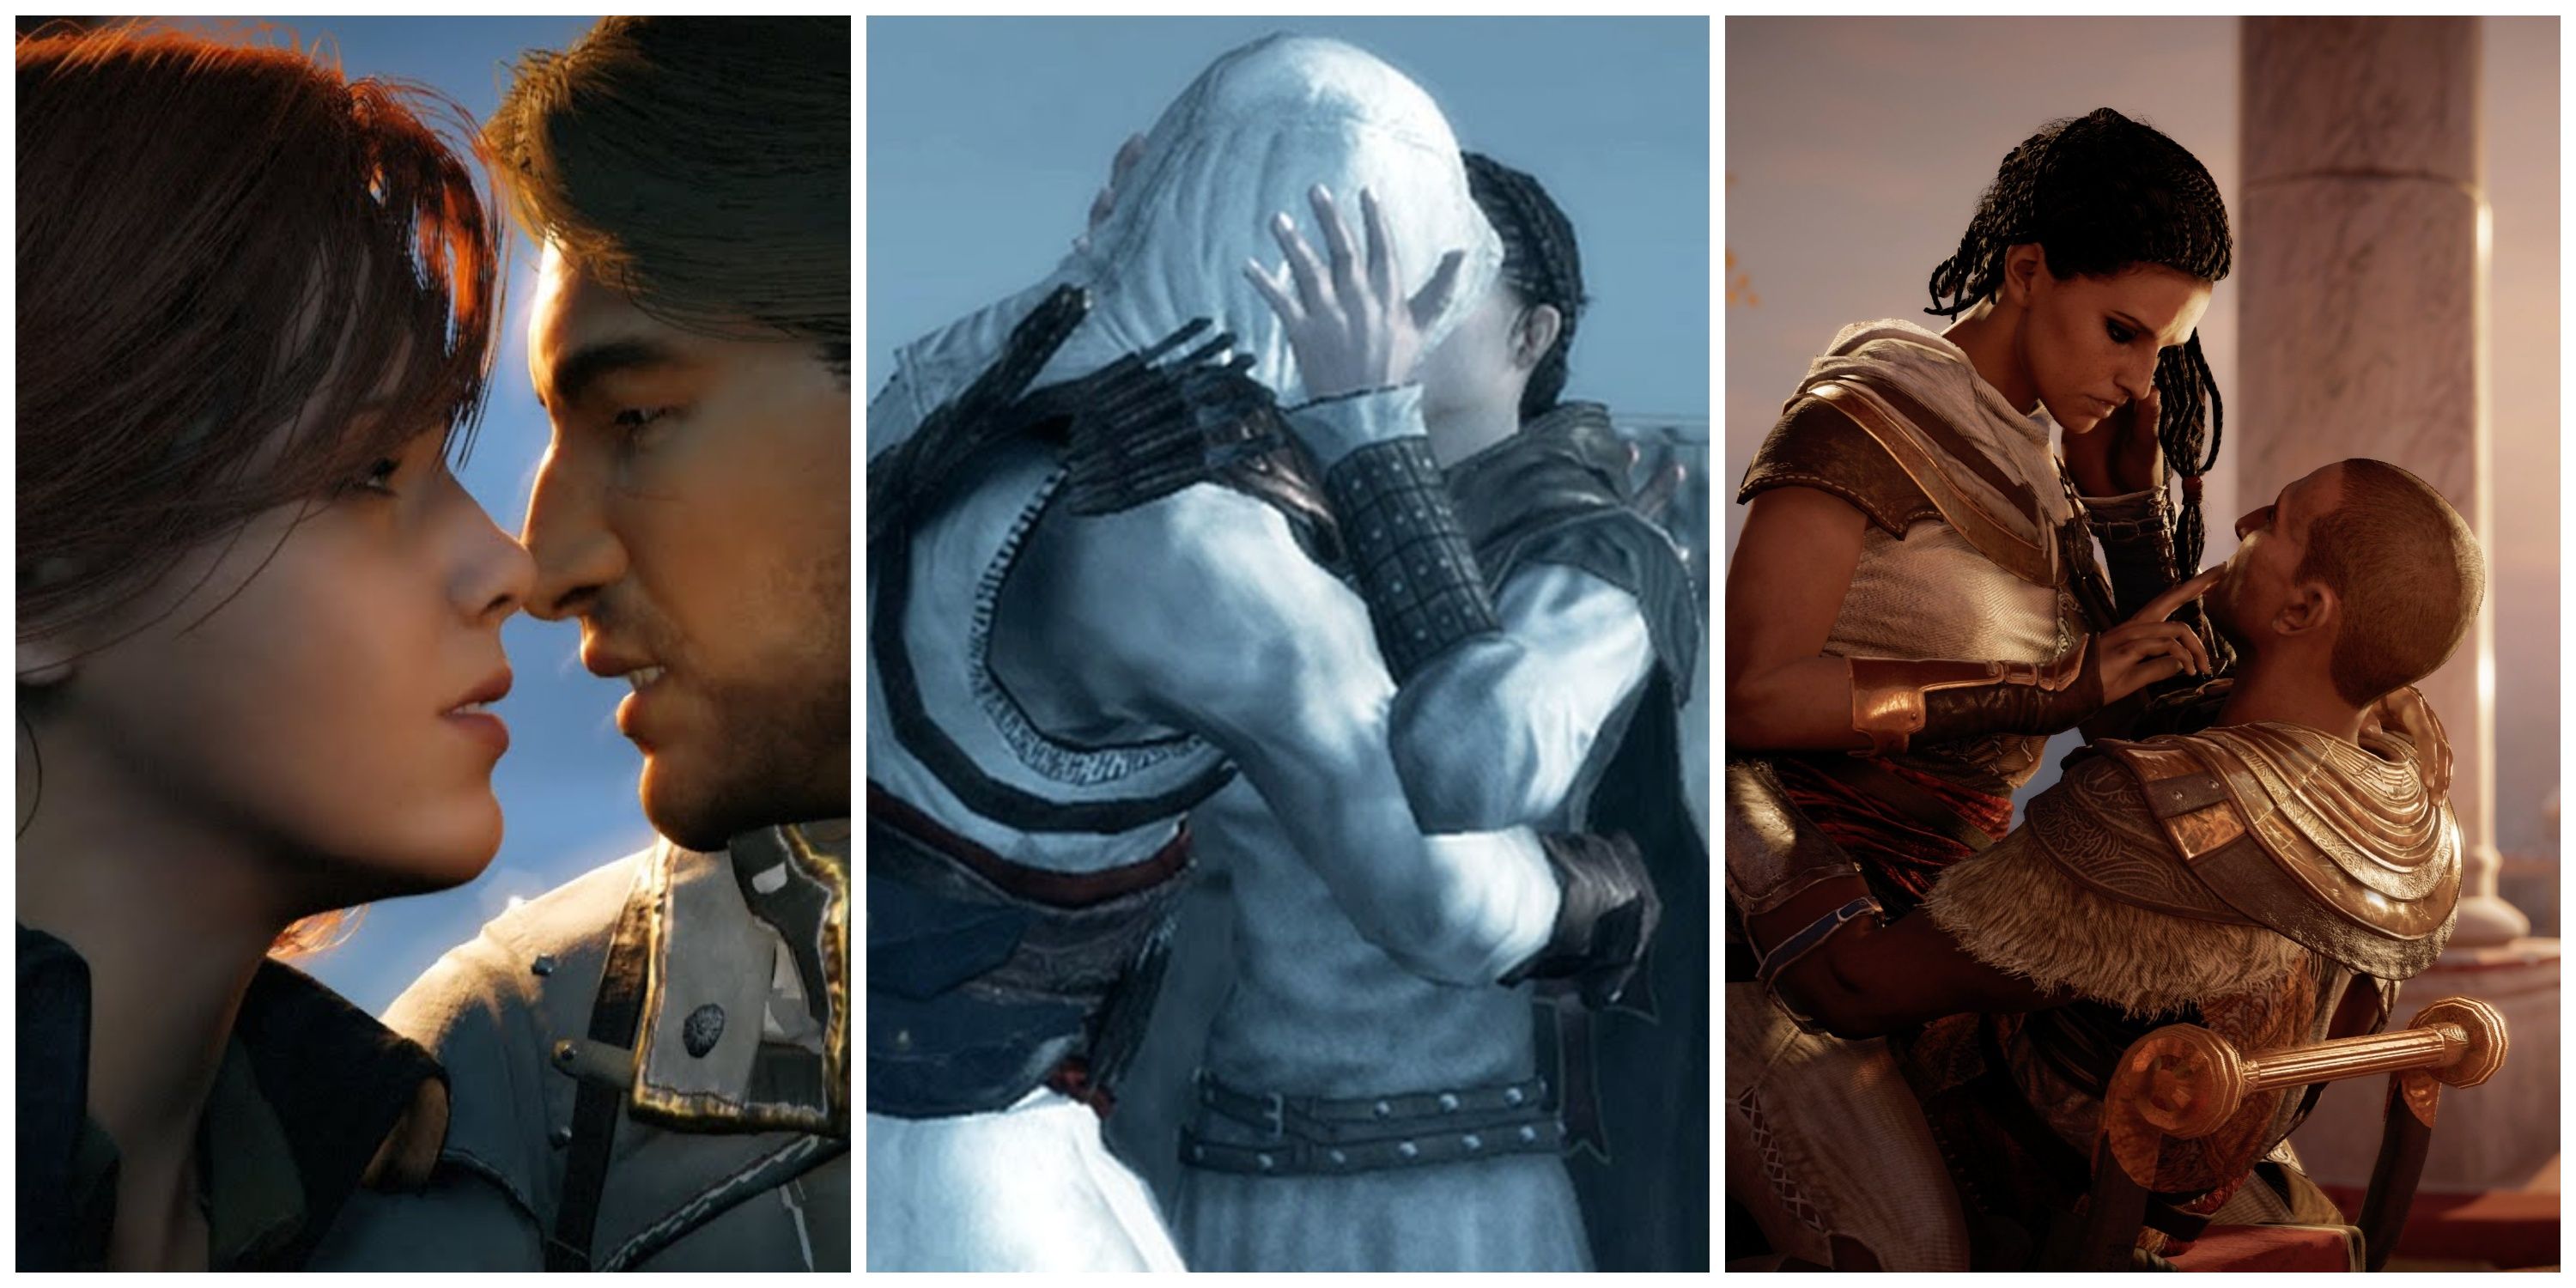 elsie and arno, altiar kissing marie, bayet and aya, assassins creed characters romance